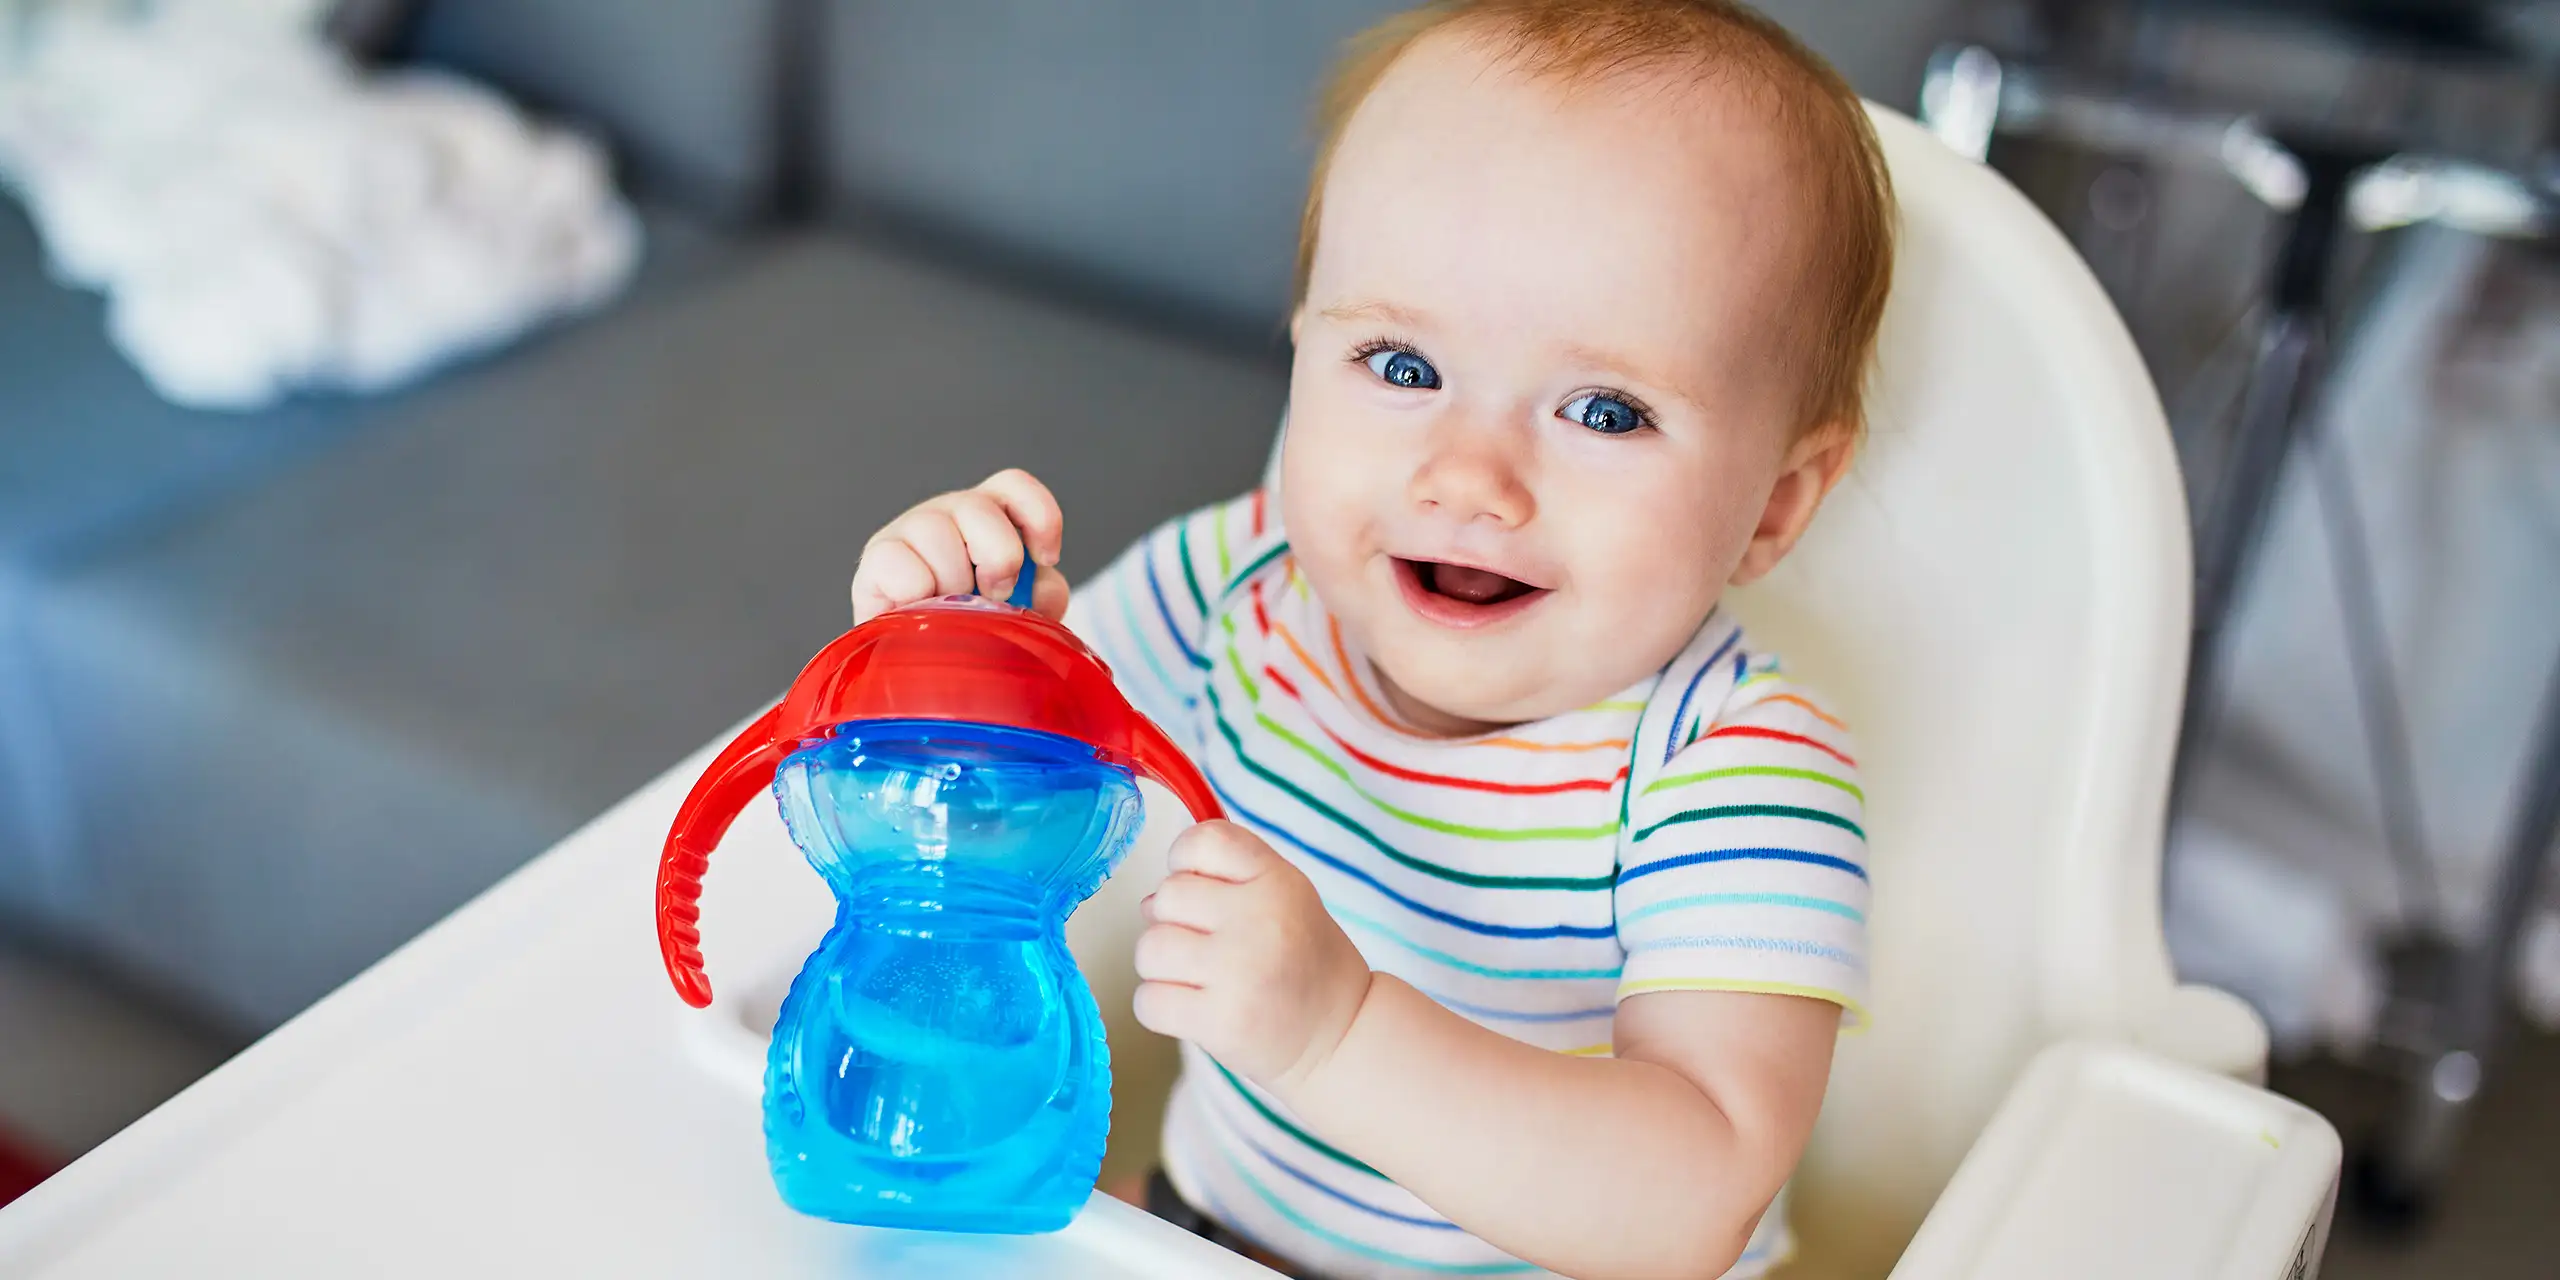 https://www.familyvacationcritic.com/wp-content/webp-express/webp-images/doc-root/wp-content/uploads/sites/19/2020/03/toddler-sippy-cup-high-chair.jpg.webp